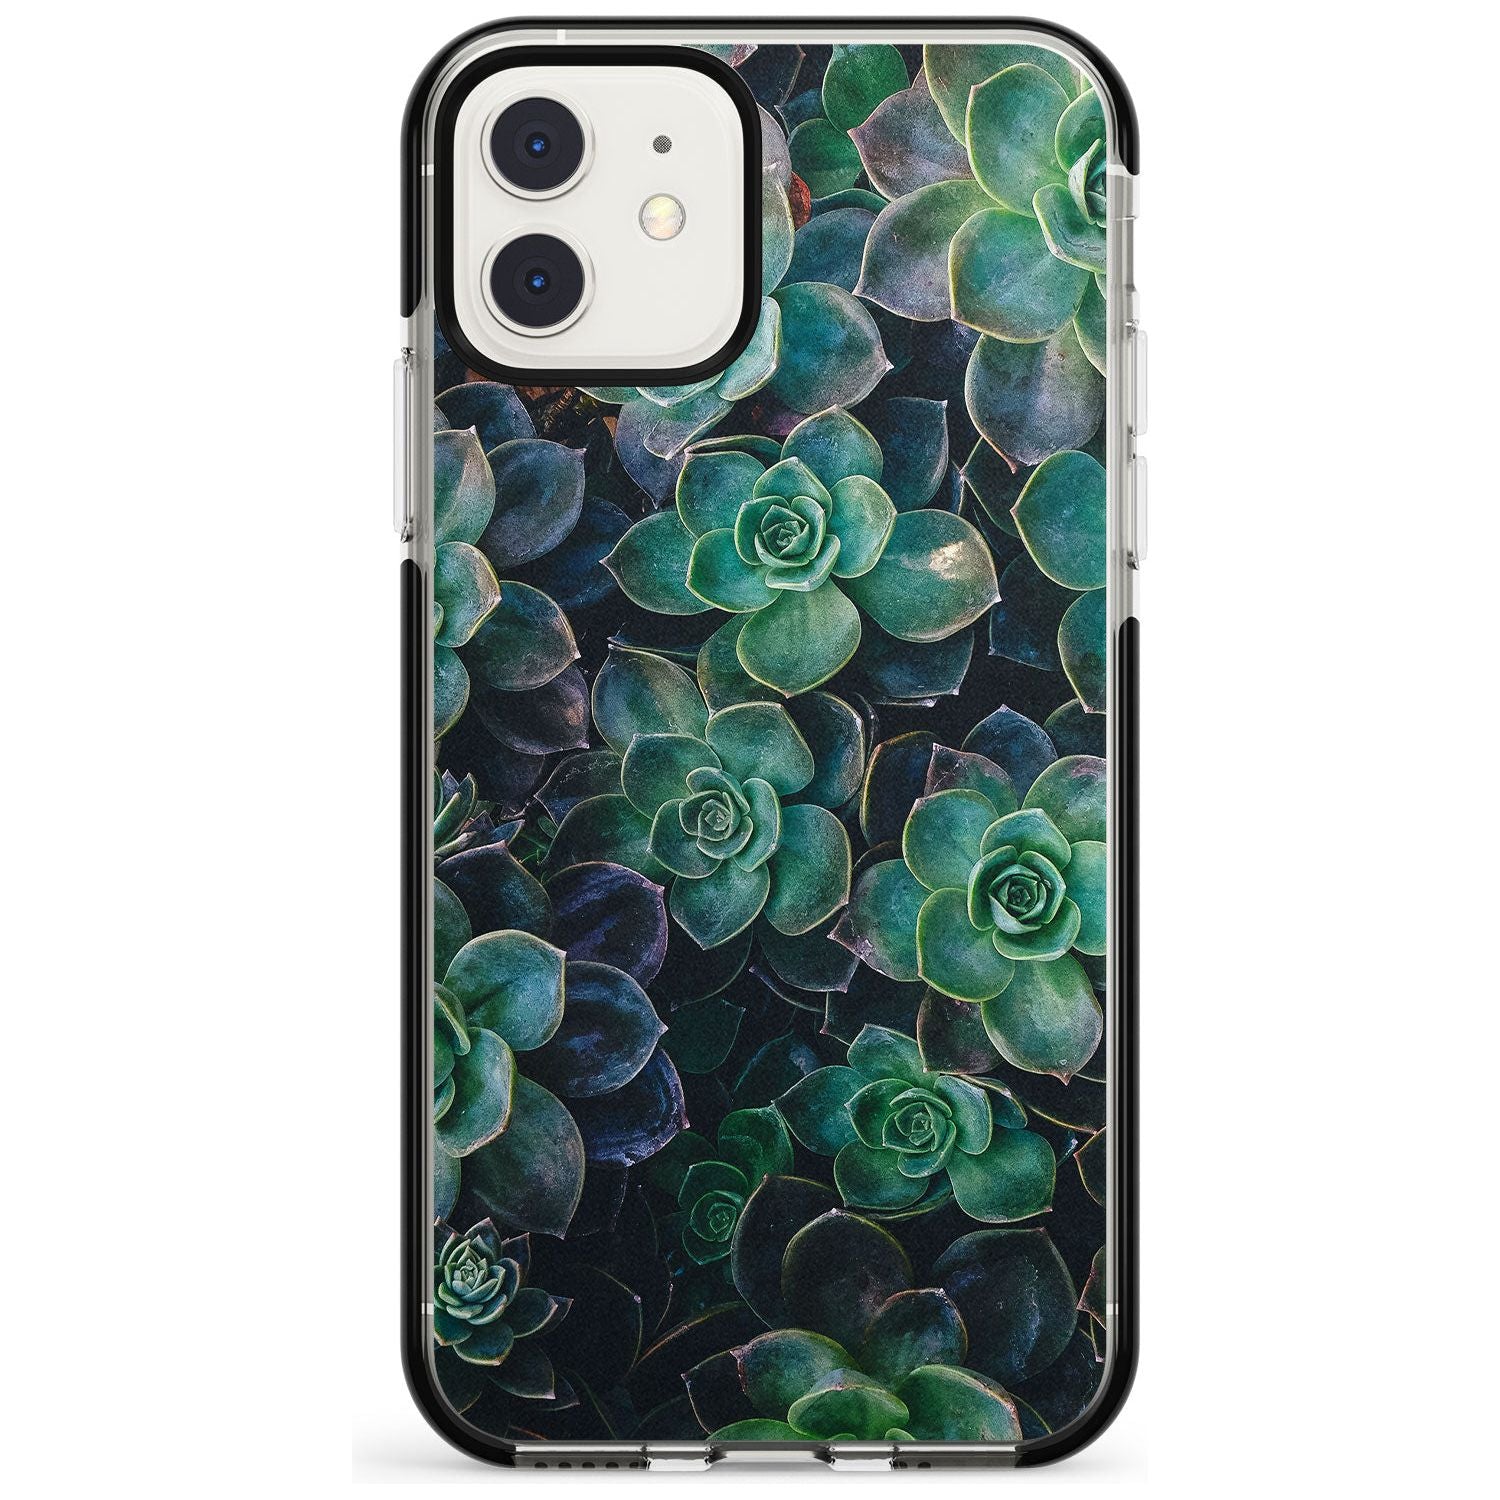 Succulents - Real Botanical Photographs Black Impact Phone Case for iPhone 11